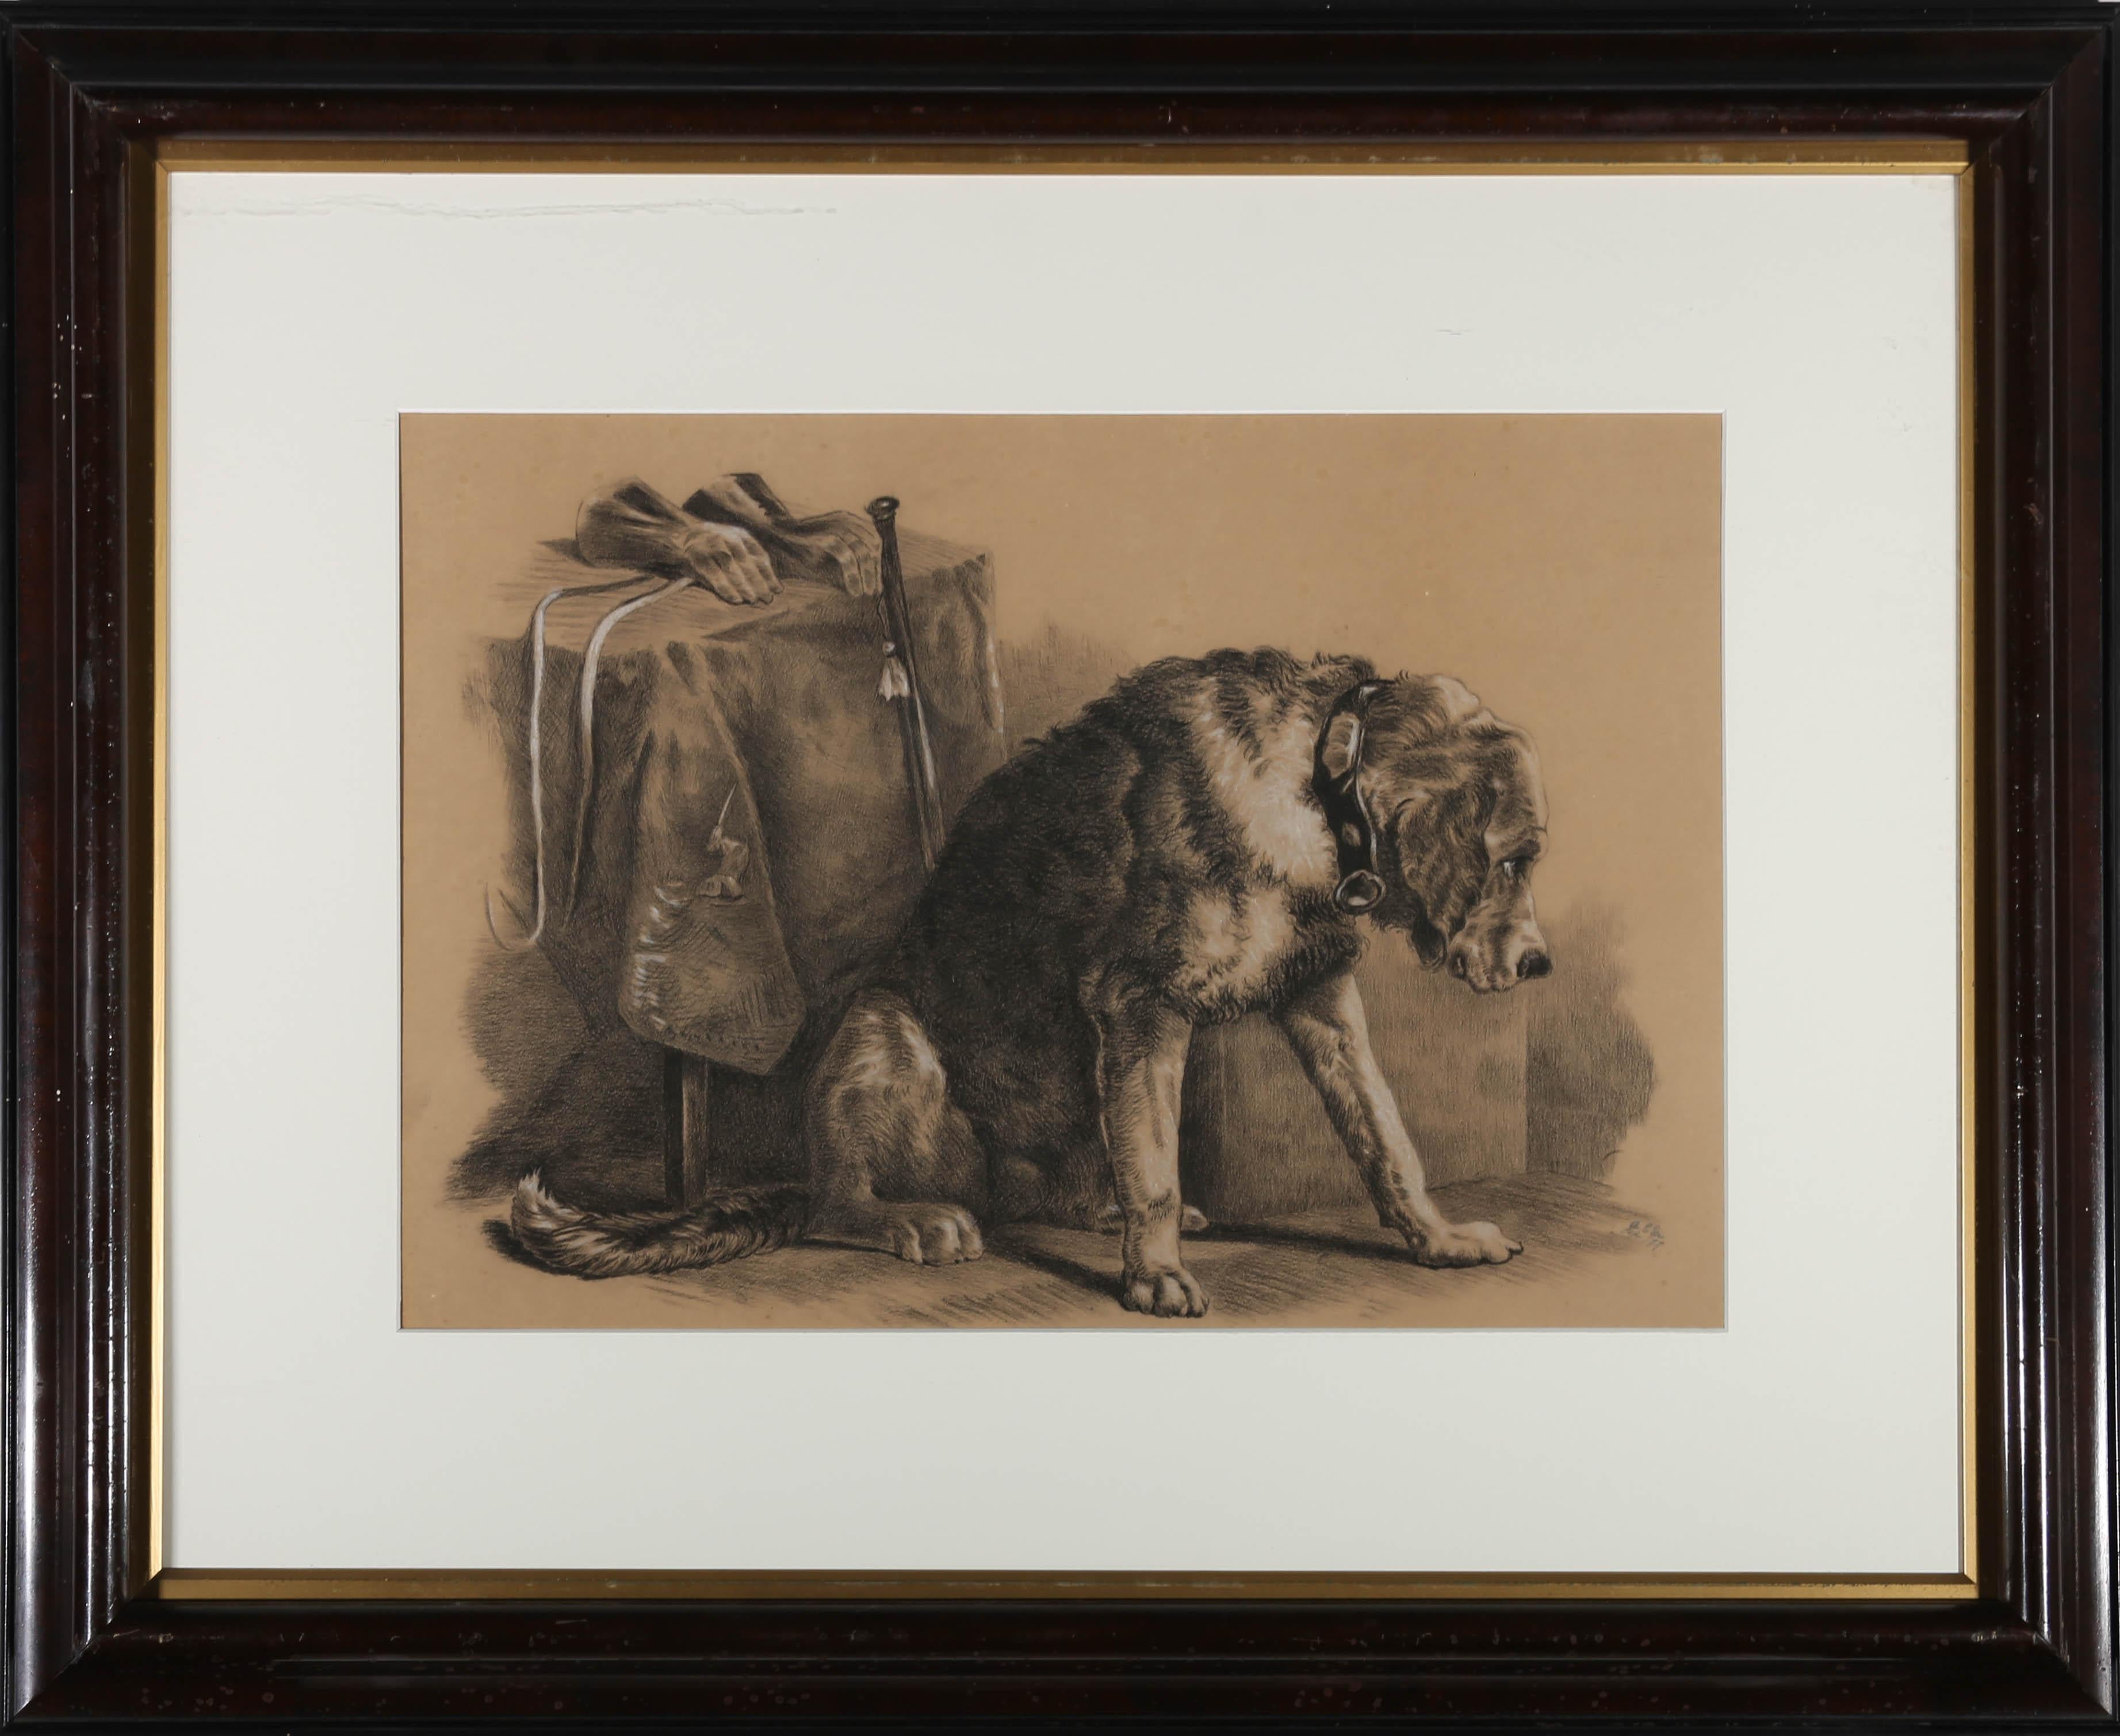 Unknown Animal Art - Large Framed Late 19th Century Charcoal Drawing - Obedient Hound